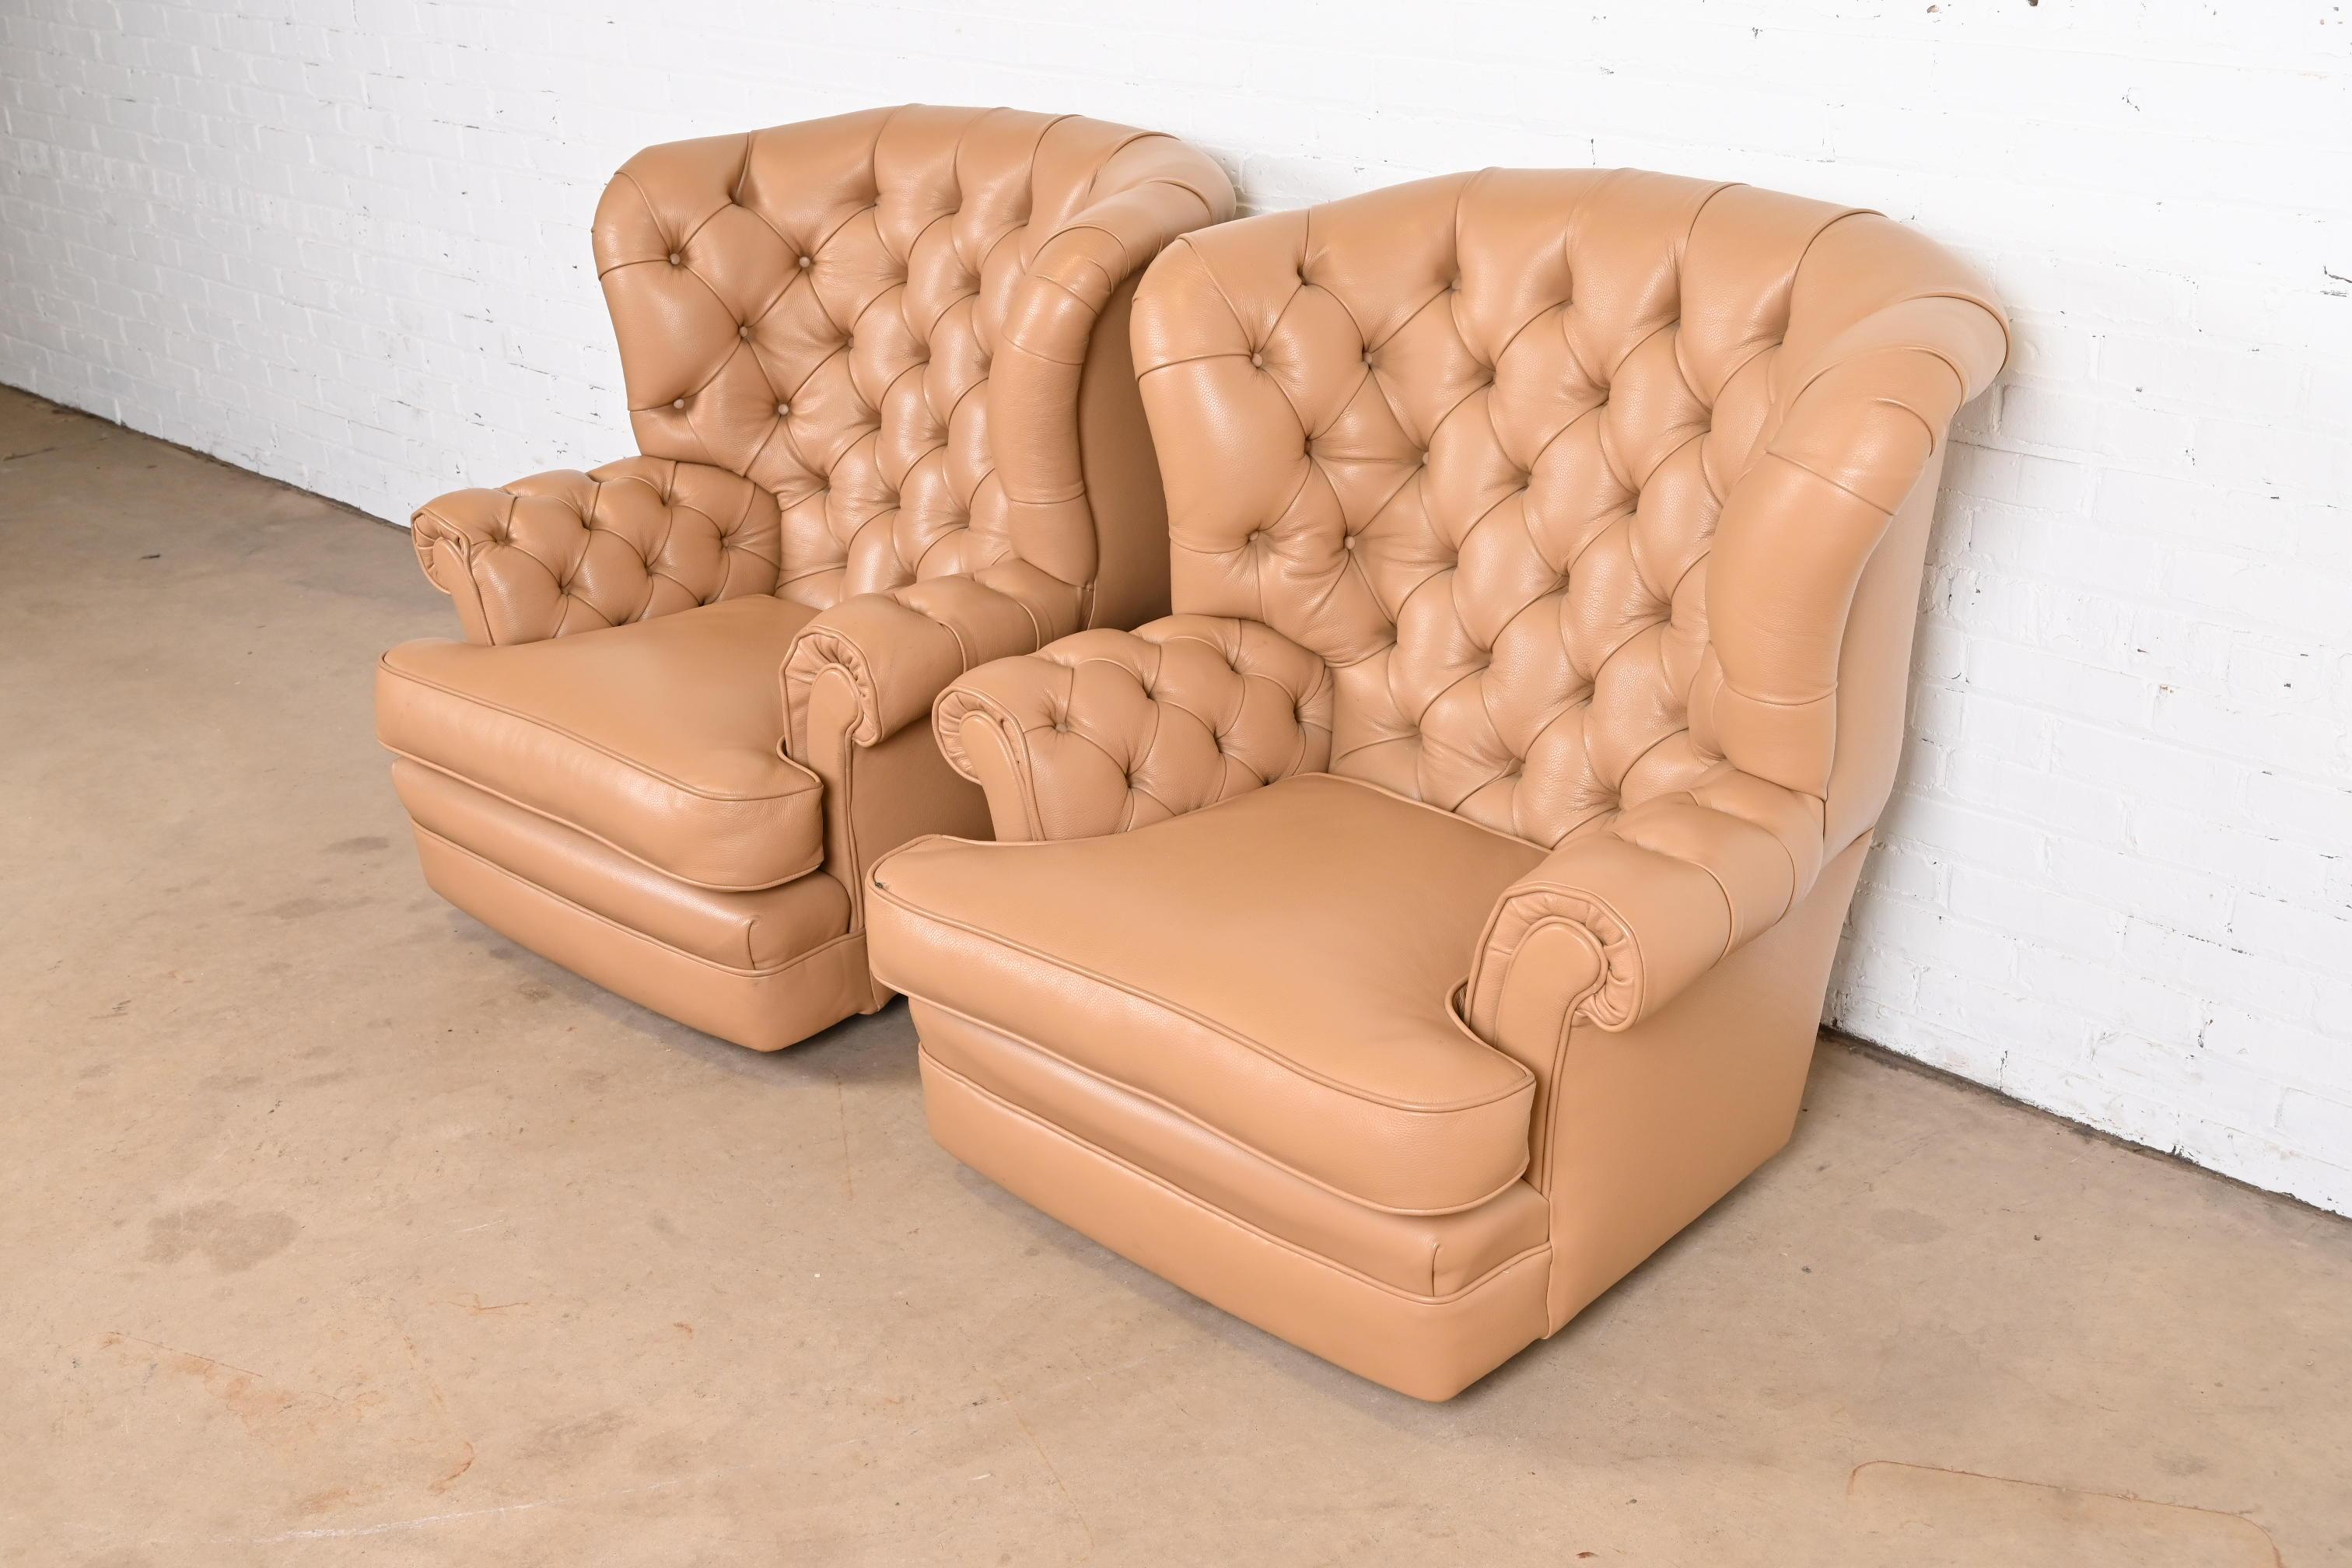 Vintage Tufted Leather Chesterfield Wingback Lounge Chairs, Pair In Good Condition For Sale In South Bend, IN